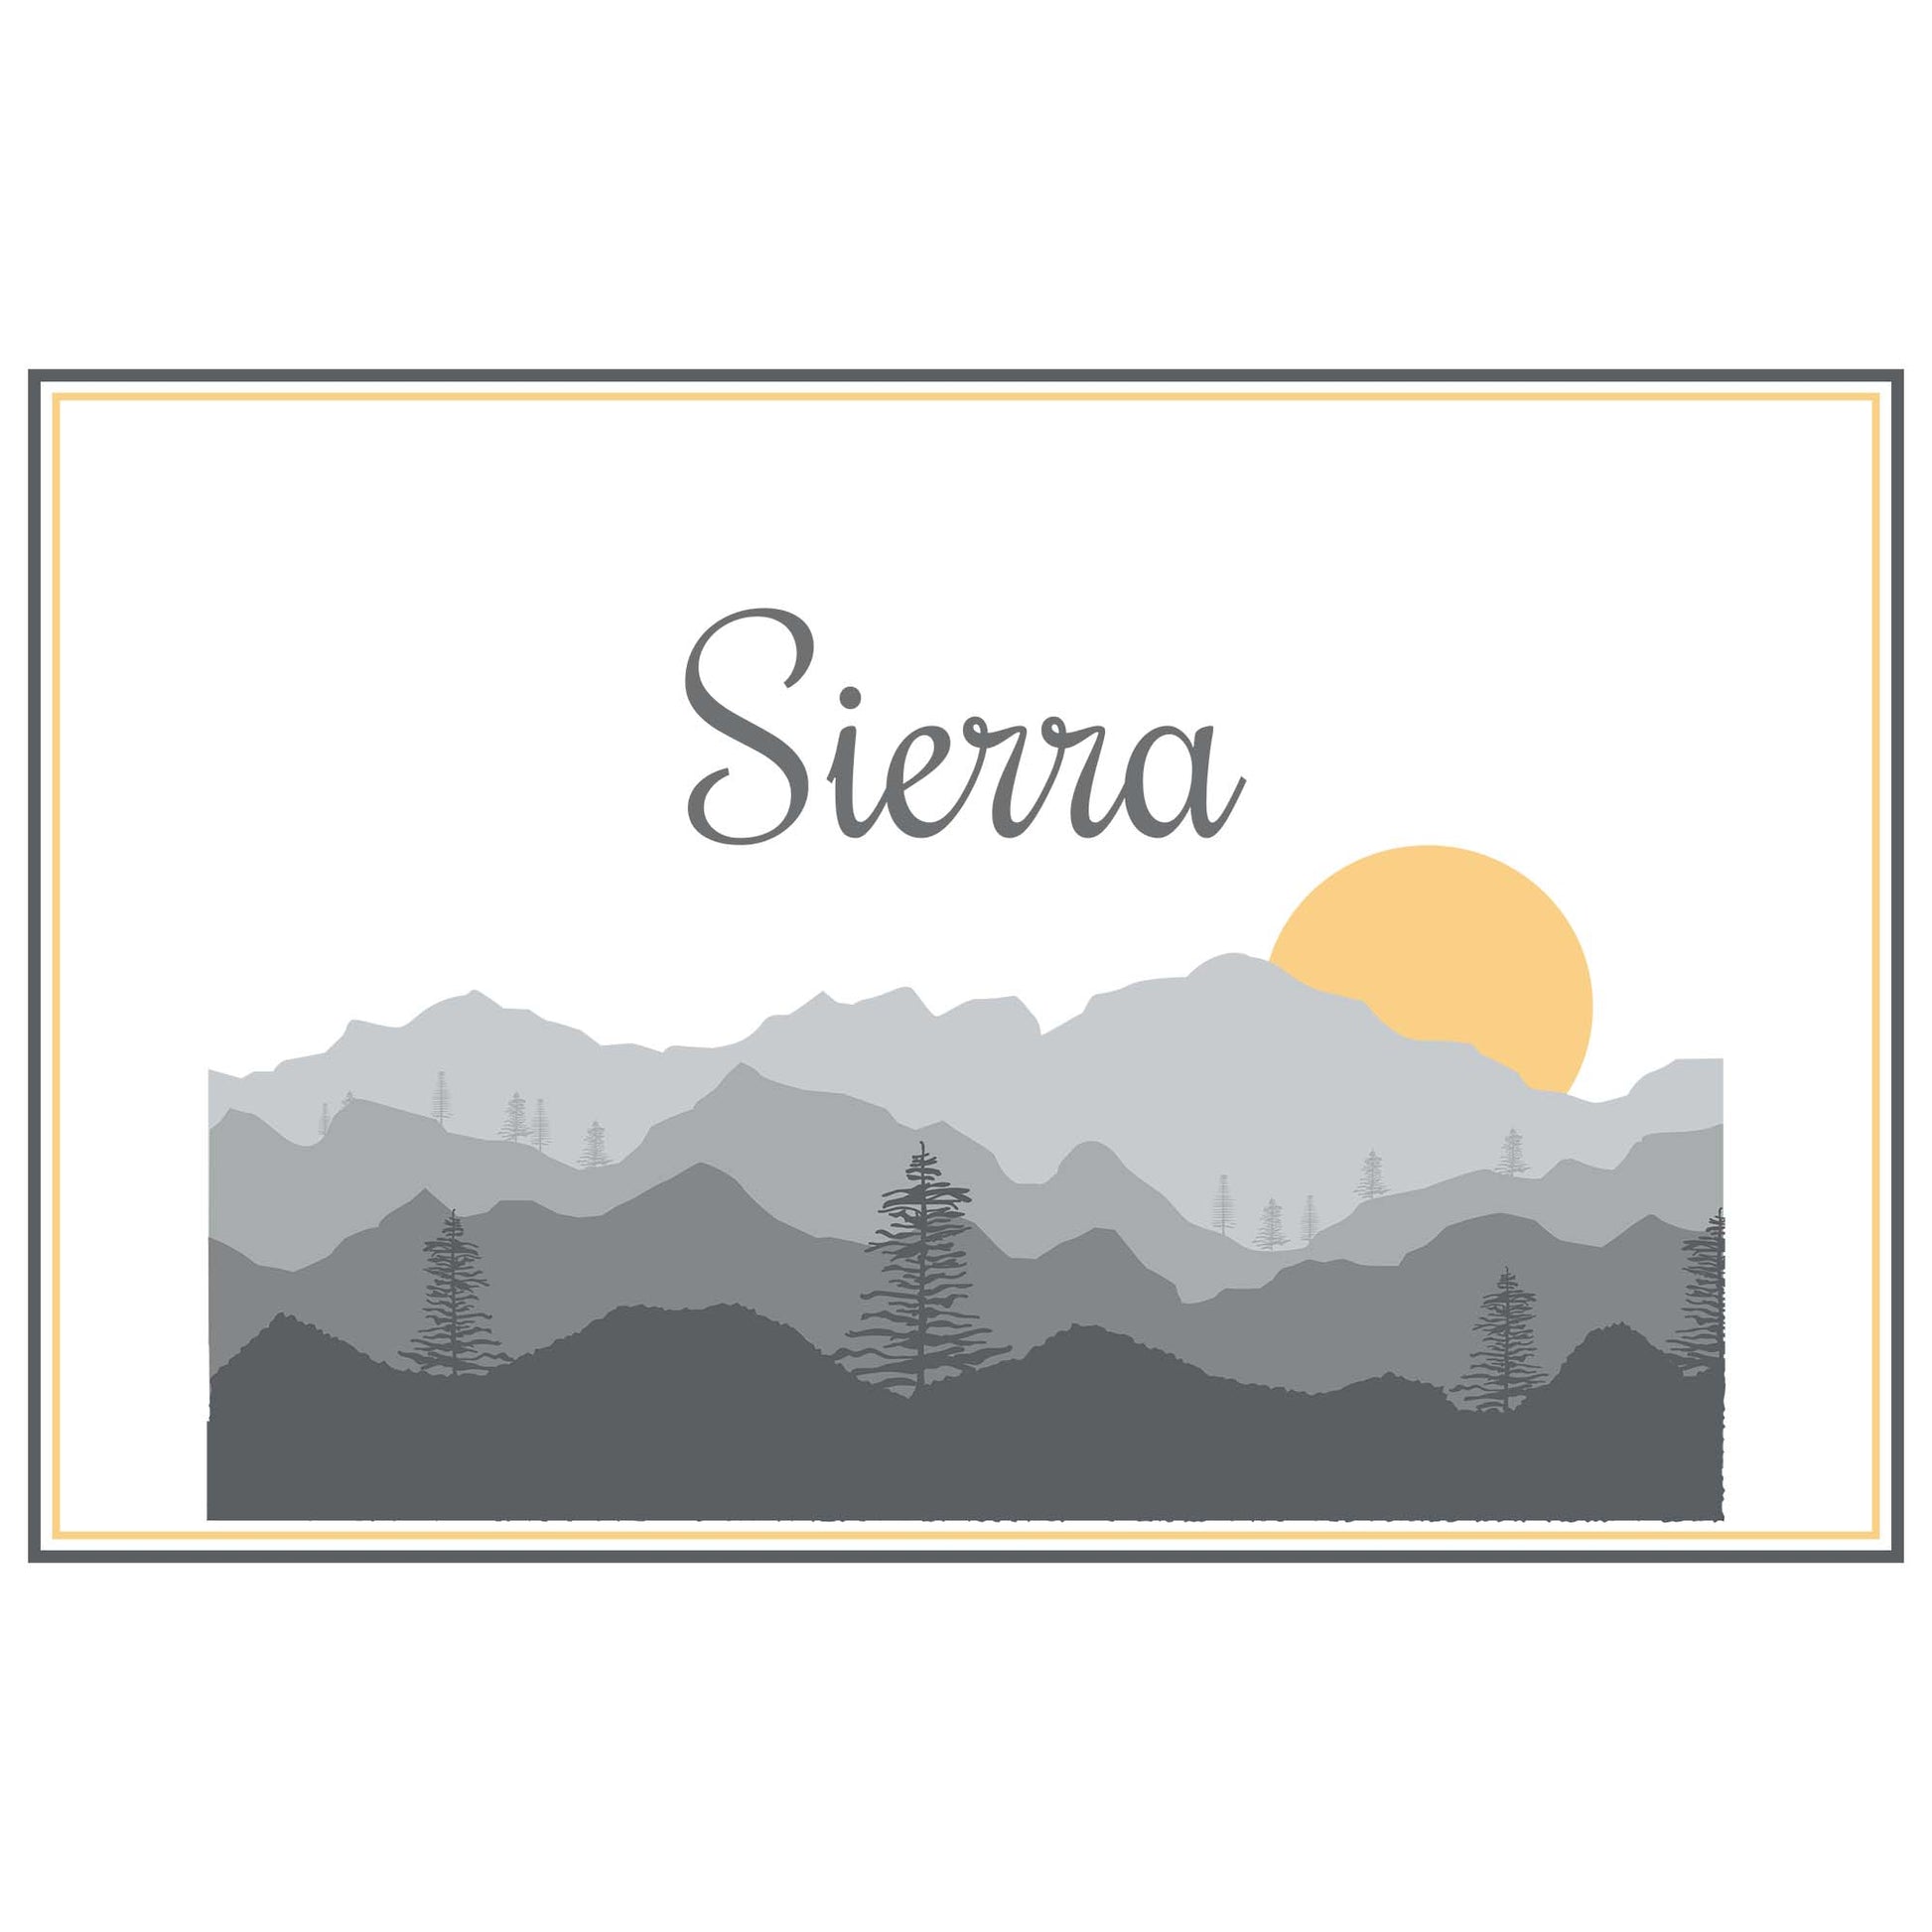 Personalized Placemat with Misty Mountain design